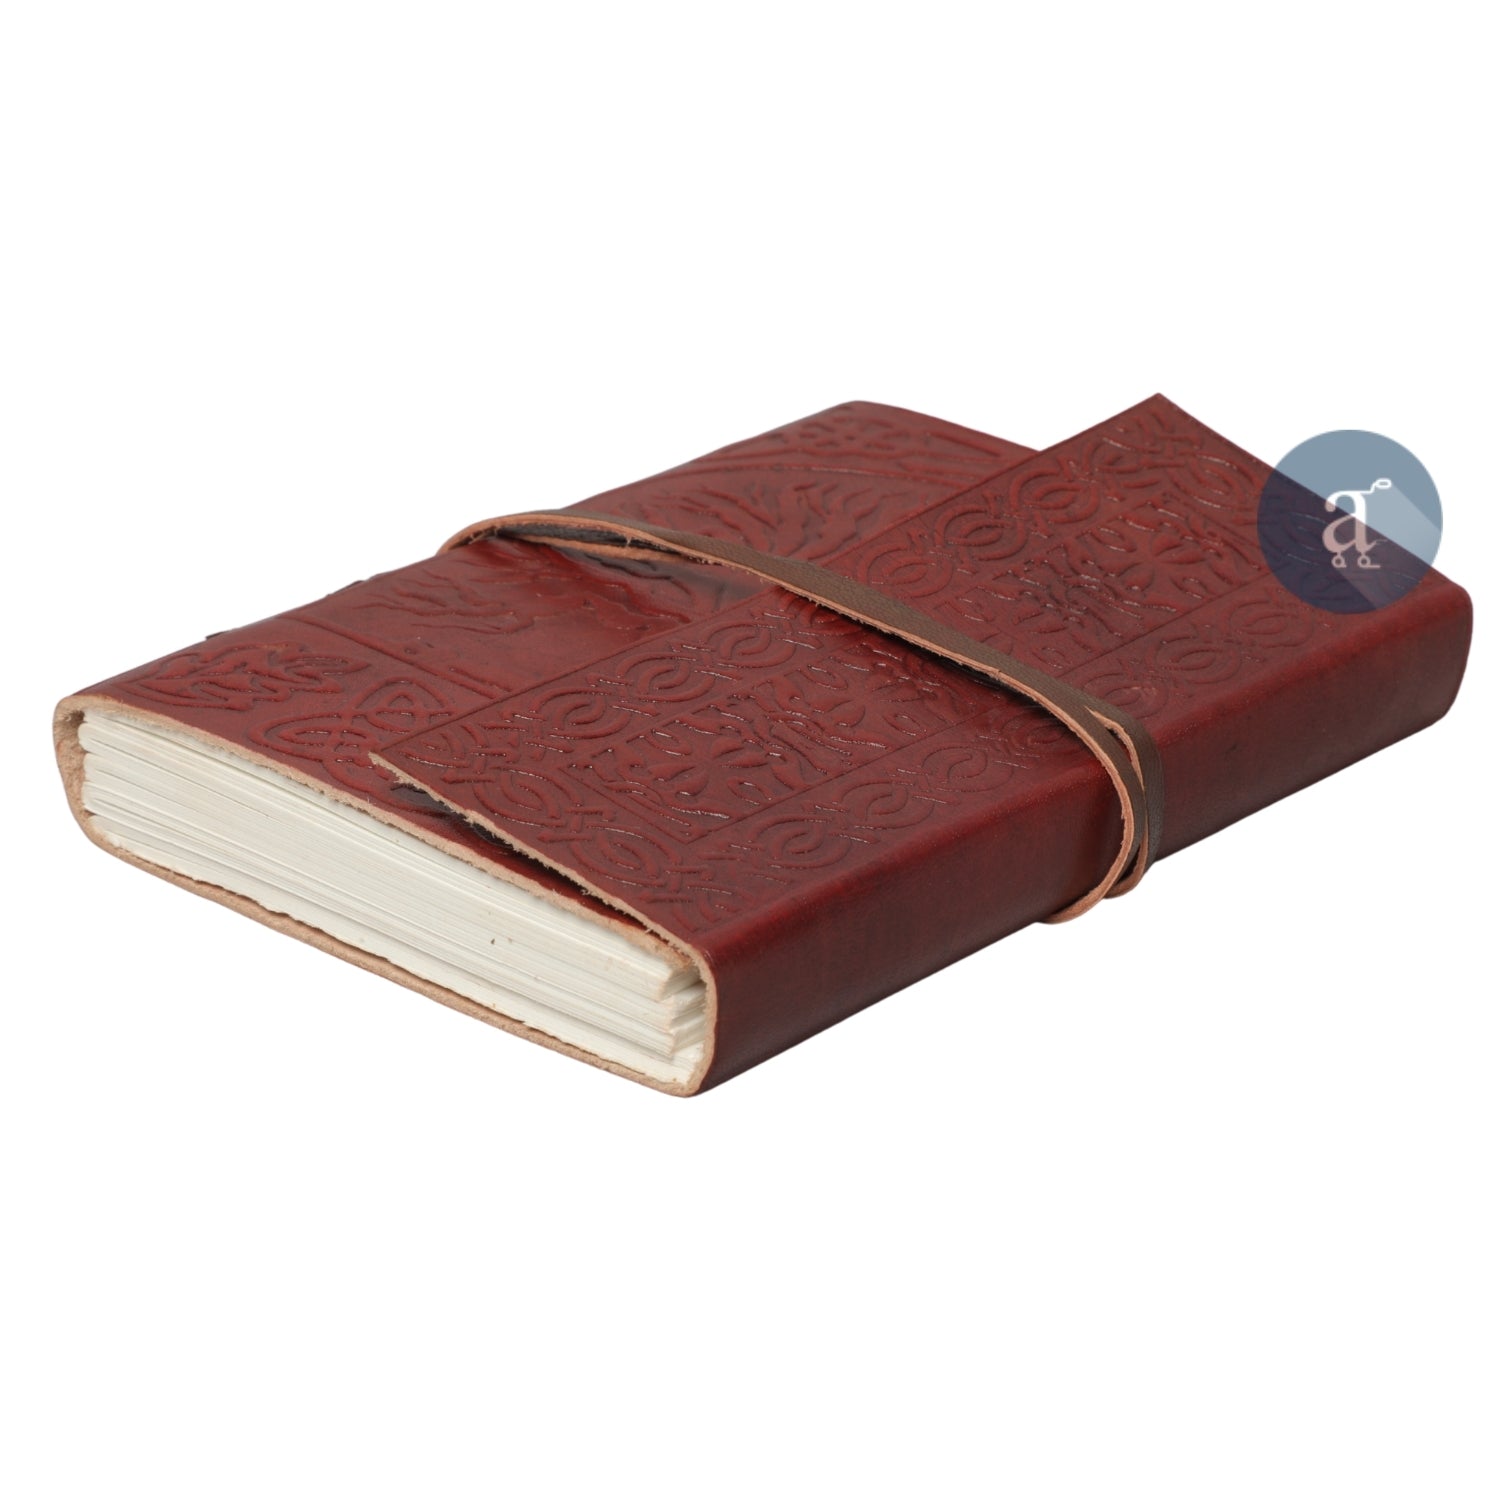 Tree Of Life Embossed Leather Journal with Leather Thread